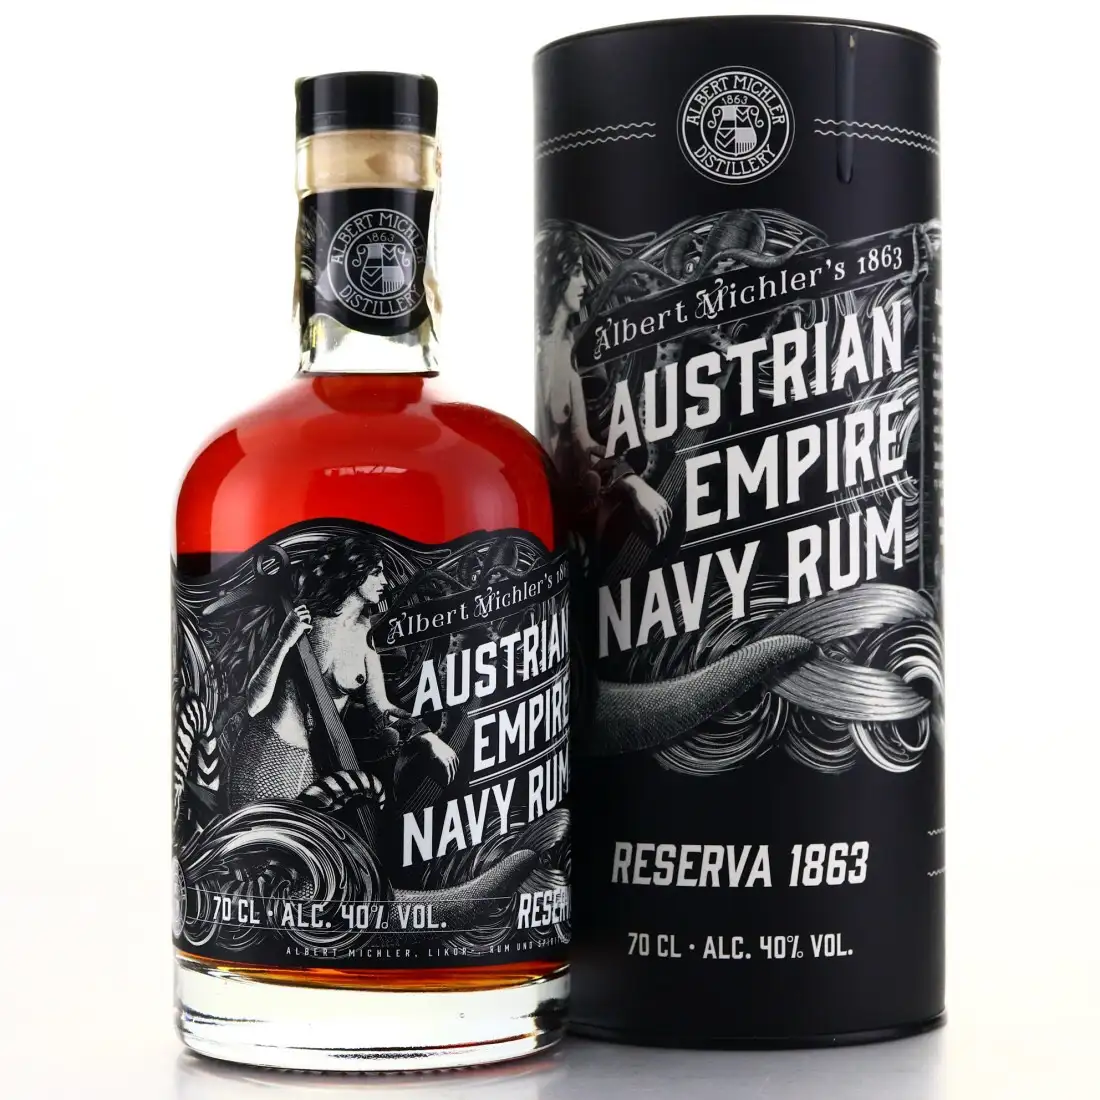 Image of the front of the bottle of the rum Austrian Empire Navy Rum Reserva 1863